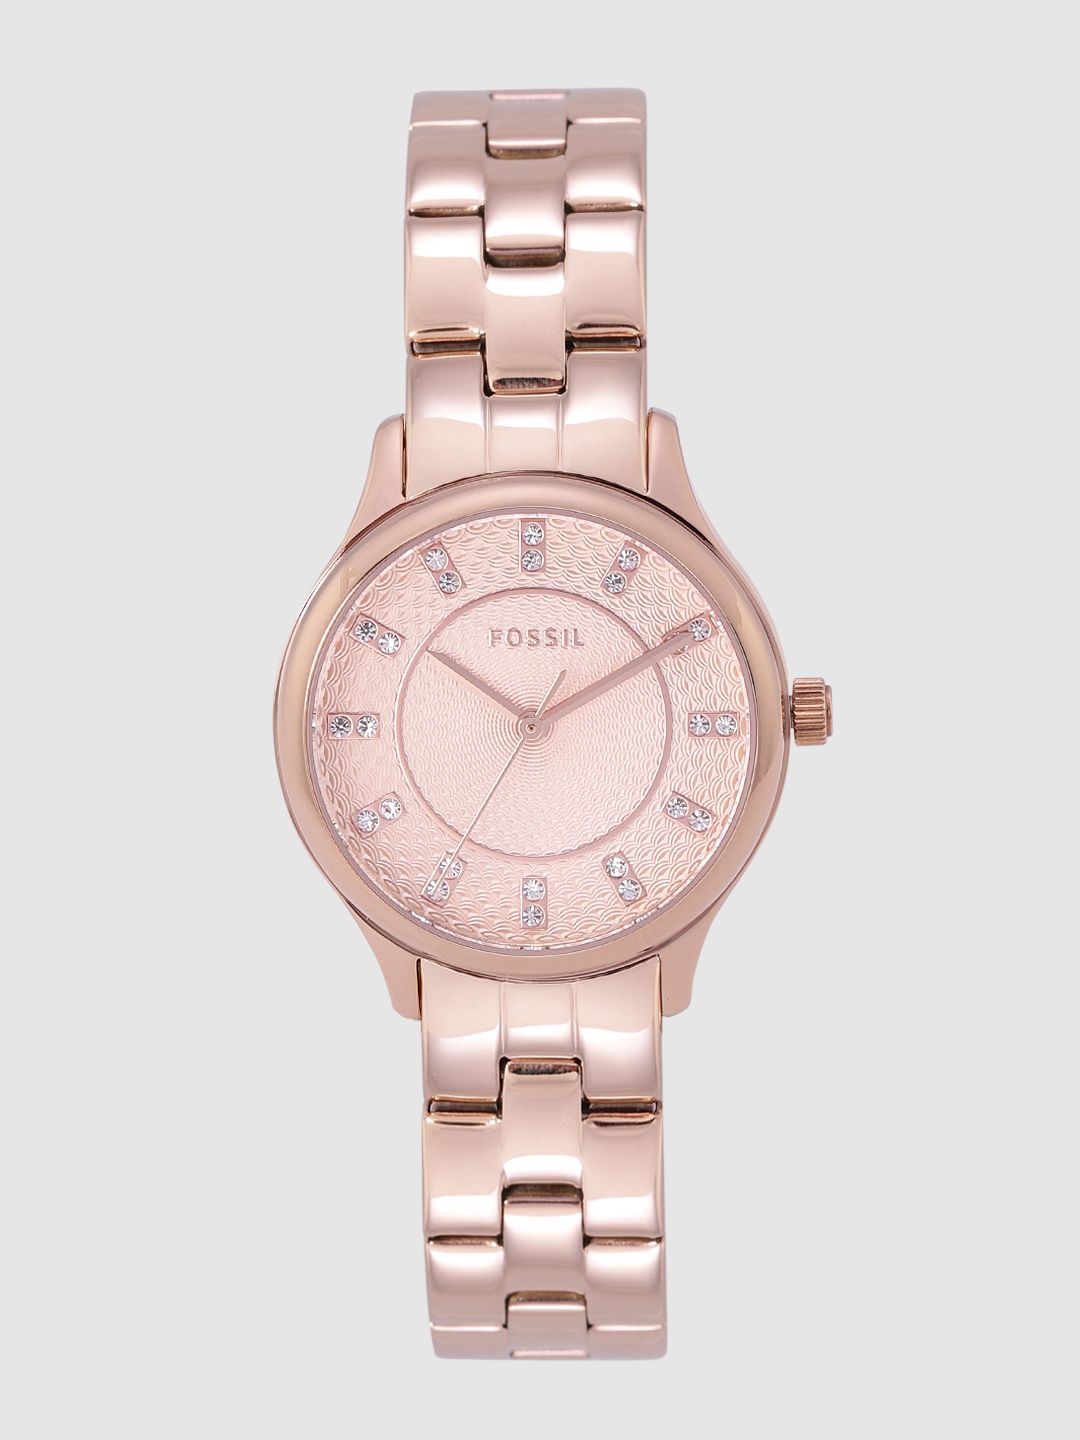 Fossil Women Rose Gold Analogue Watch BQ1571 Price in India